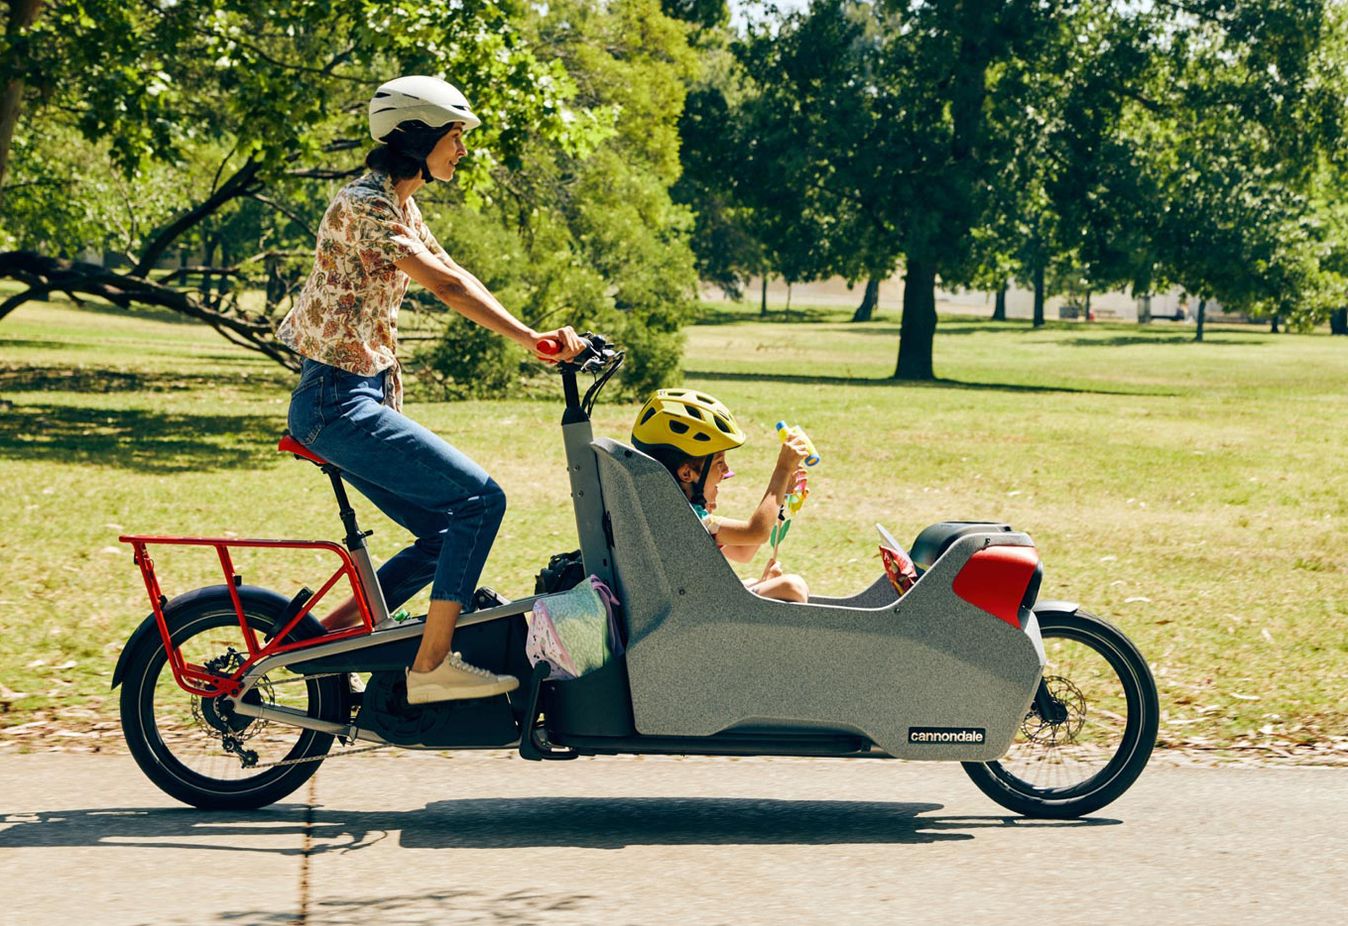 The Cannondale Wonderwagen Neo can carry up to three children